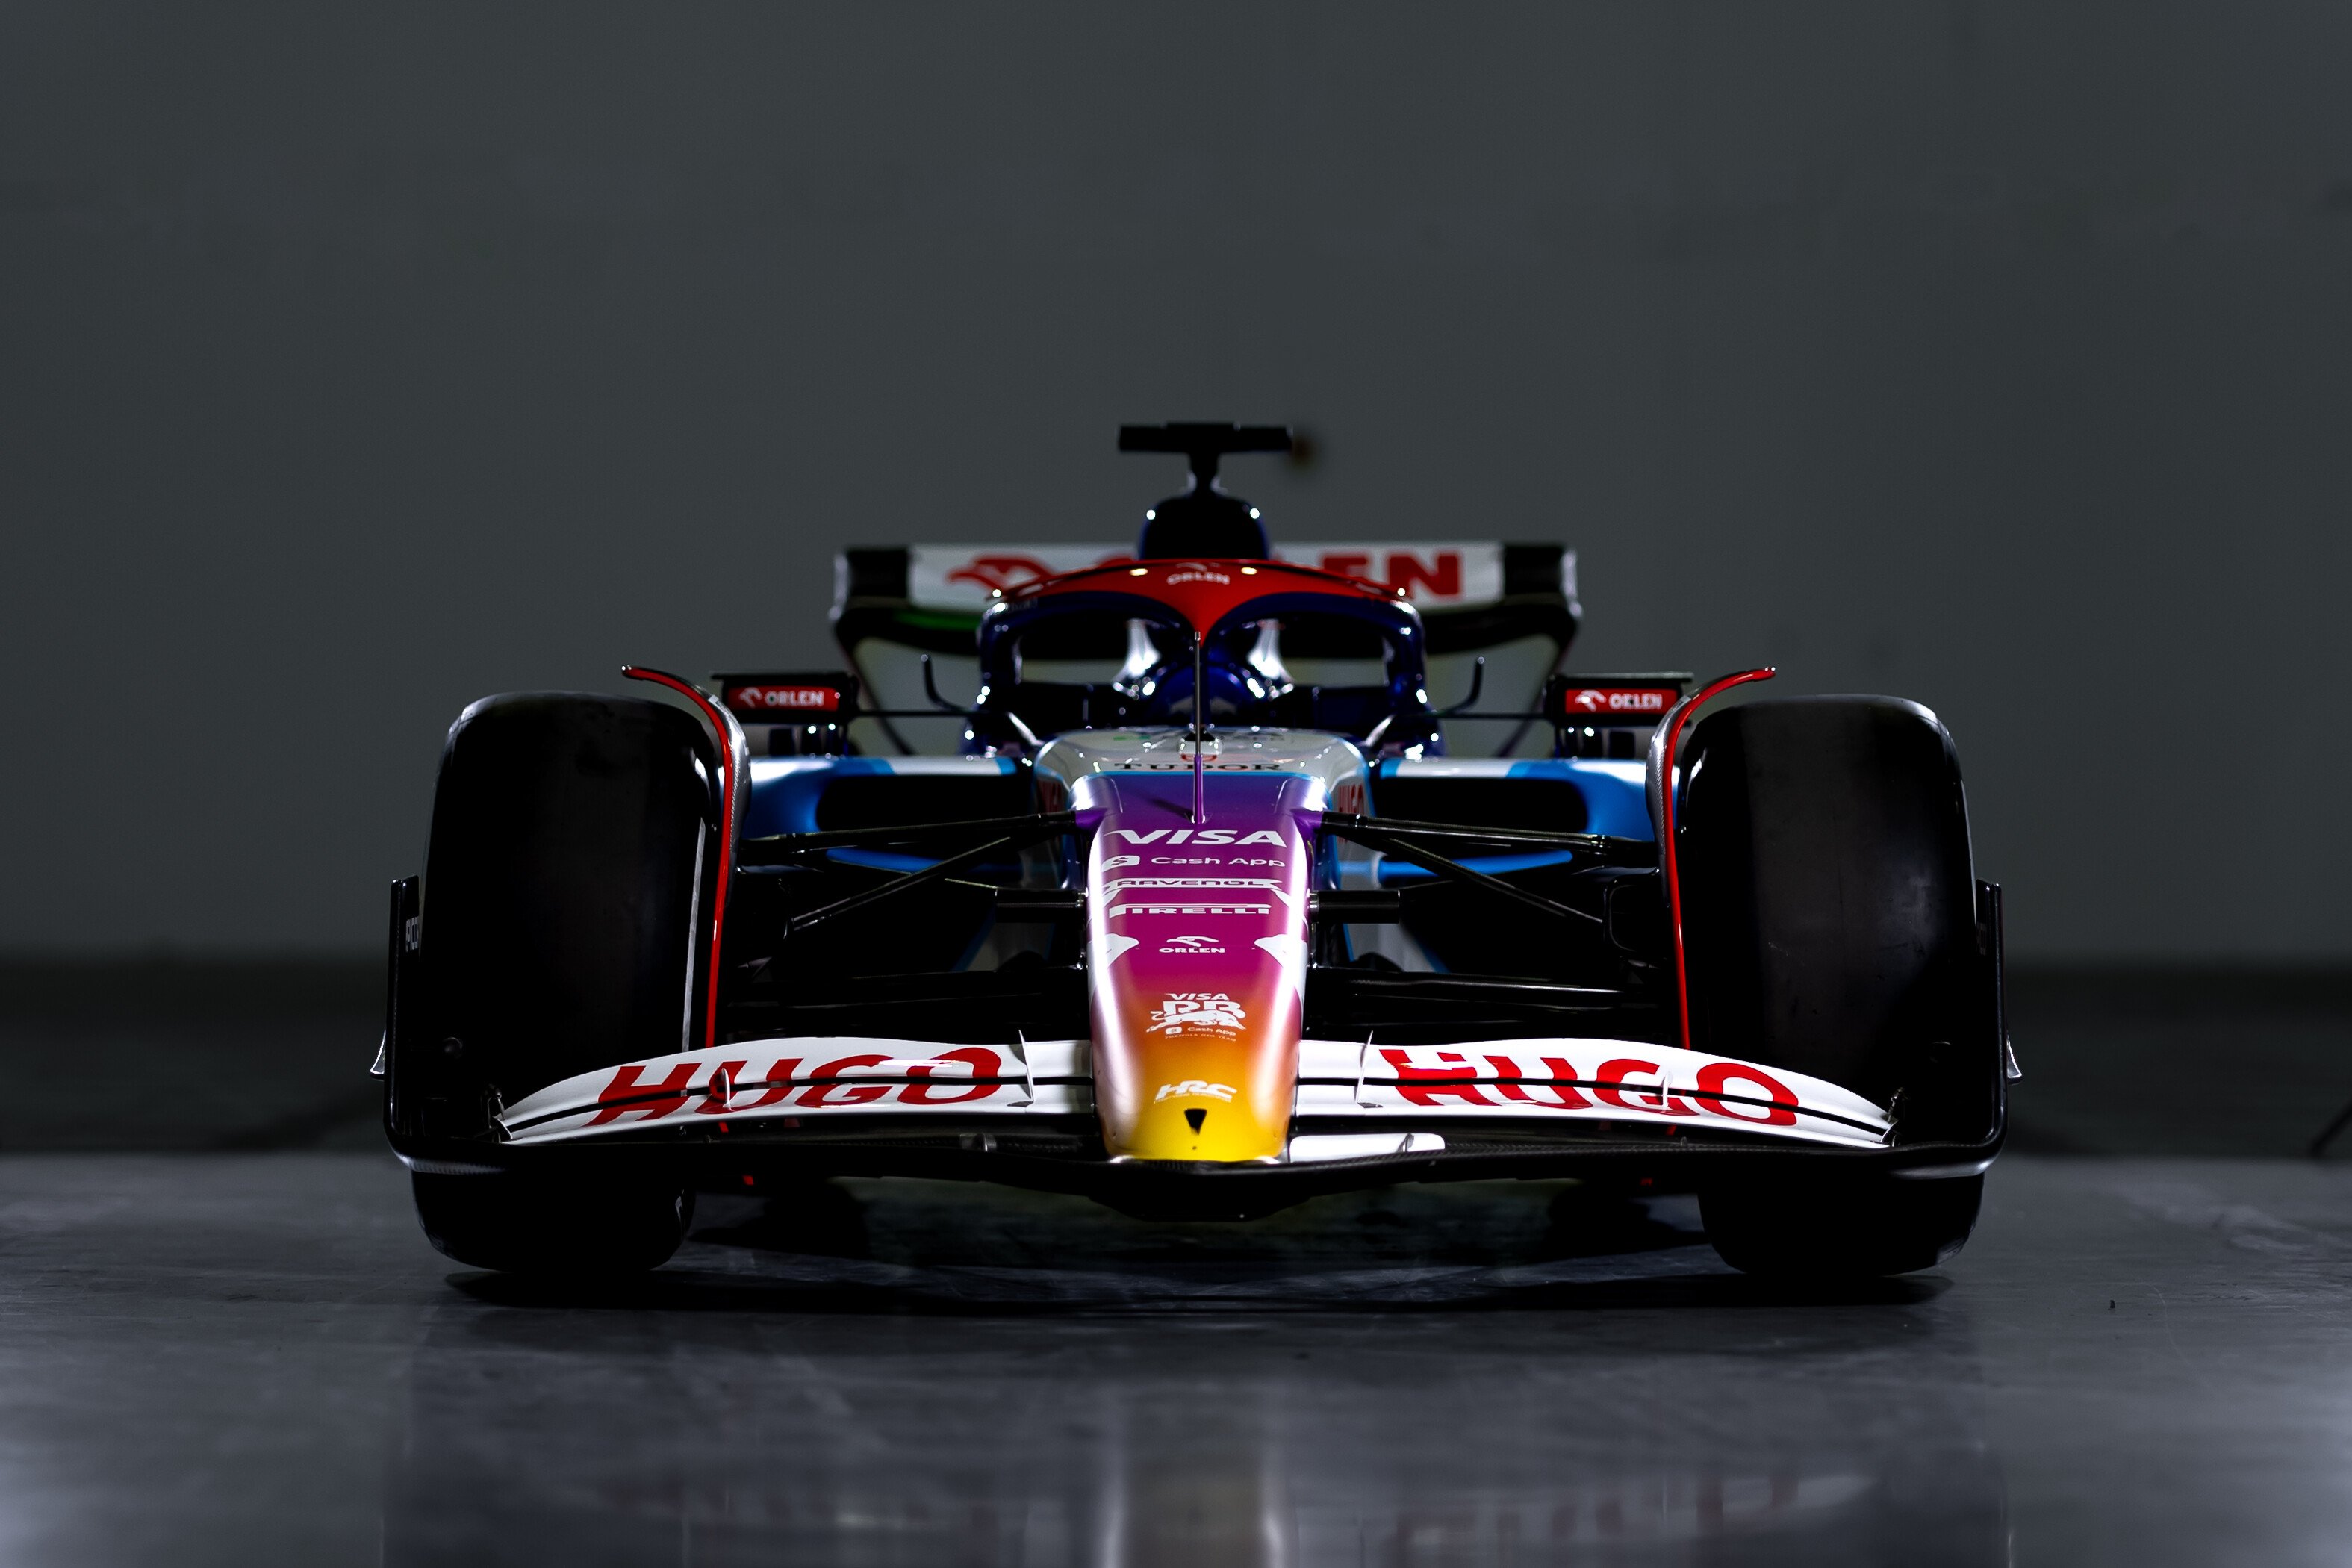 F1, Miami GP: Racing Bulls unveils a special livery